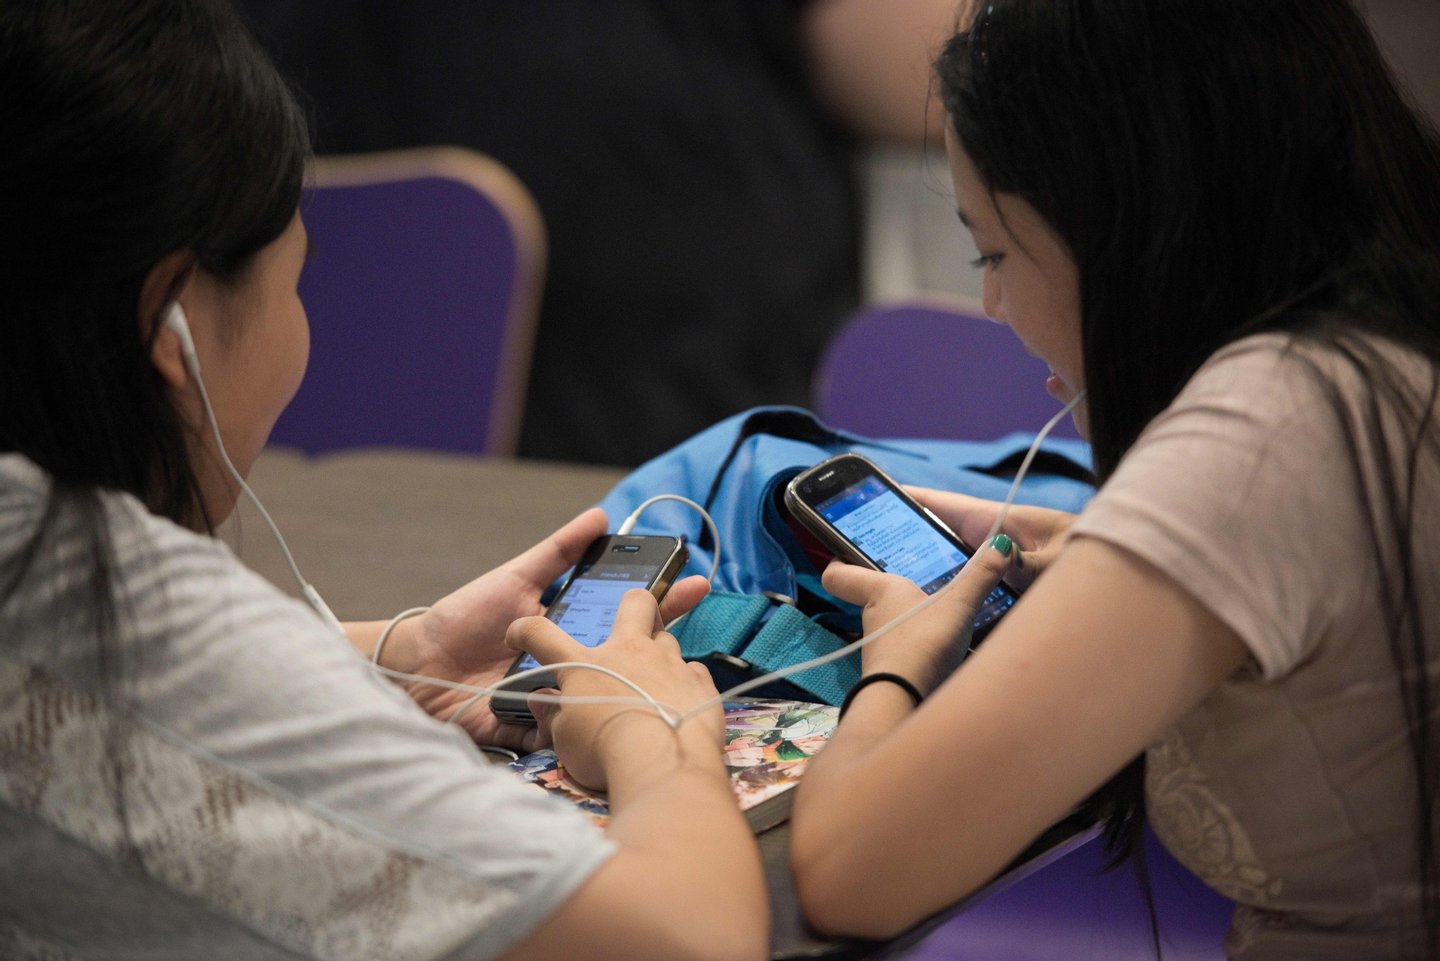 This picture taken on March 21, 2013 shows two young woman typing on their smartphones at a shopping mall in Bangkok. A recent Facebook-sponsored study showed smartphone owners are often connected all day. People can be found glued to their smartphones at airports, on trains, in restaurants and even while walking on the street, creating a disconnection from their immediate surroundings. Smartphone sales are expected to continue to surge in 2013 with some 918 million units to be bought worldwide. AFP PHOTO / Nicolas ASFOURI (Photo credit should read NICOLAS ASFOURI/AFP/Getty Images)